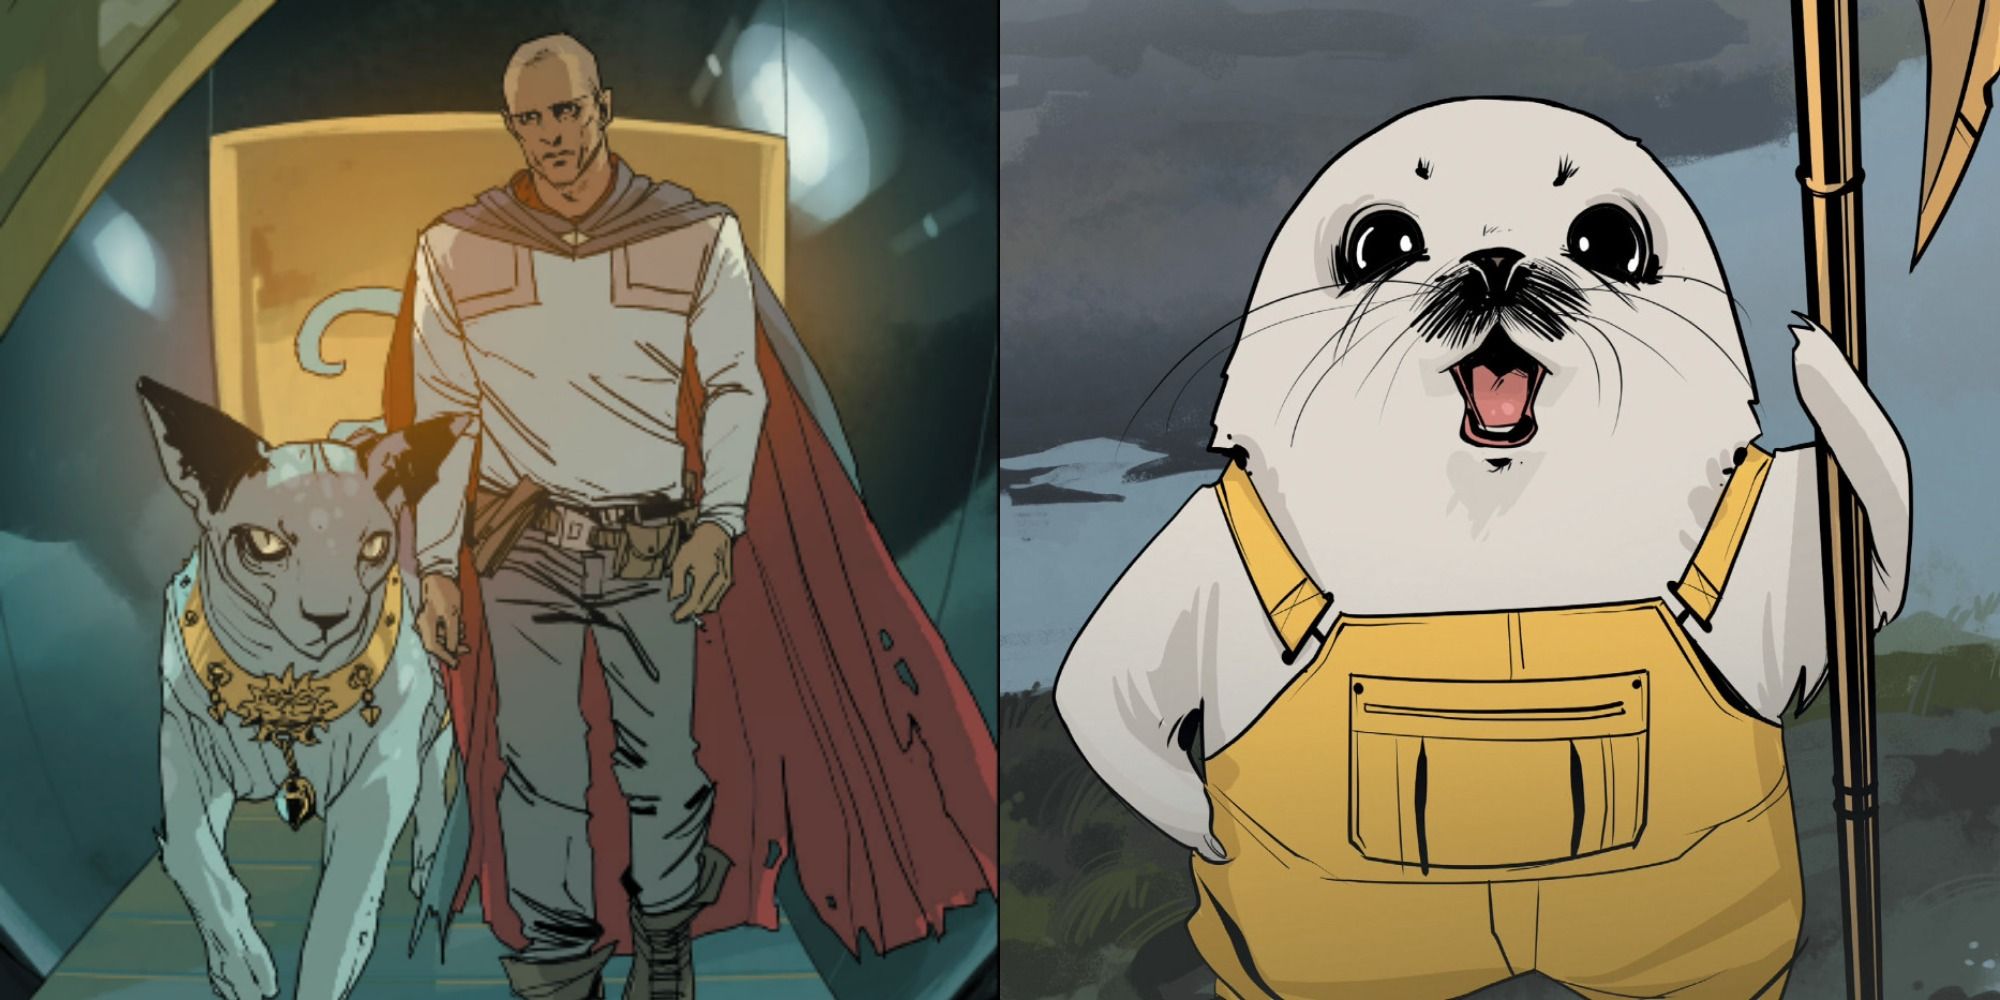 Split image showing The Will and Ghül in the Saga comic